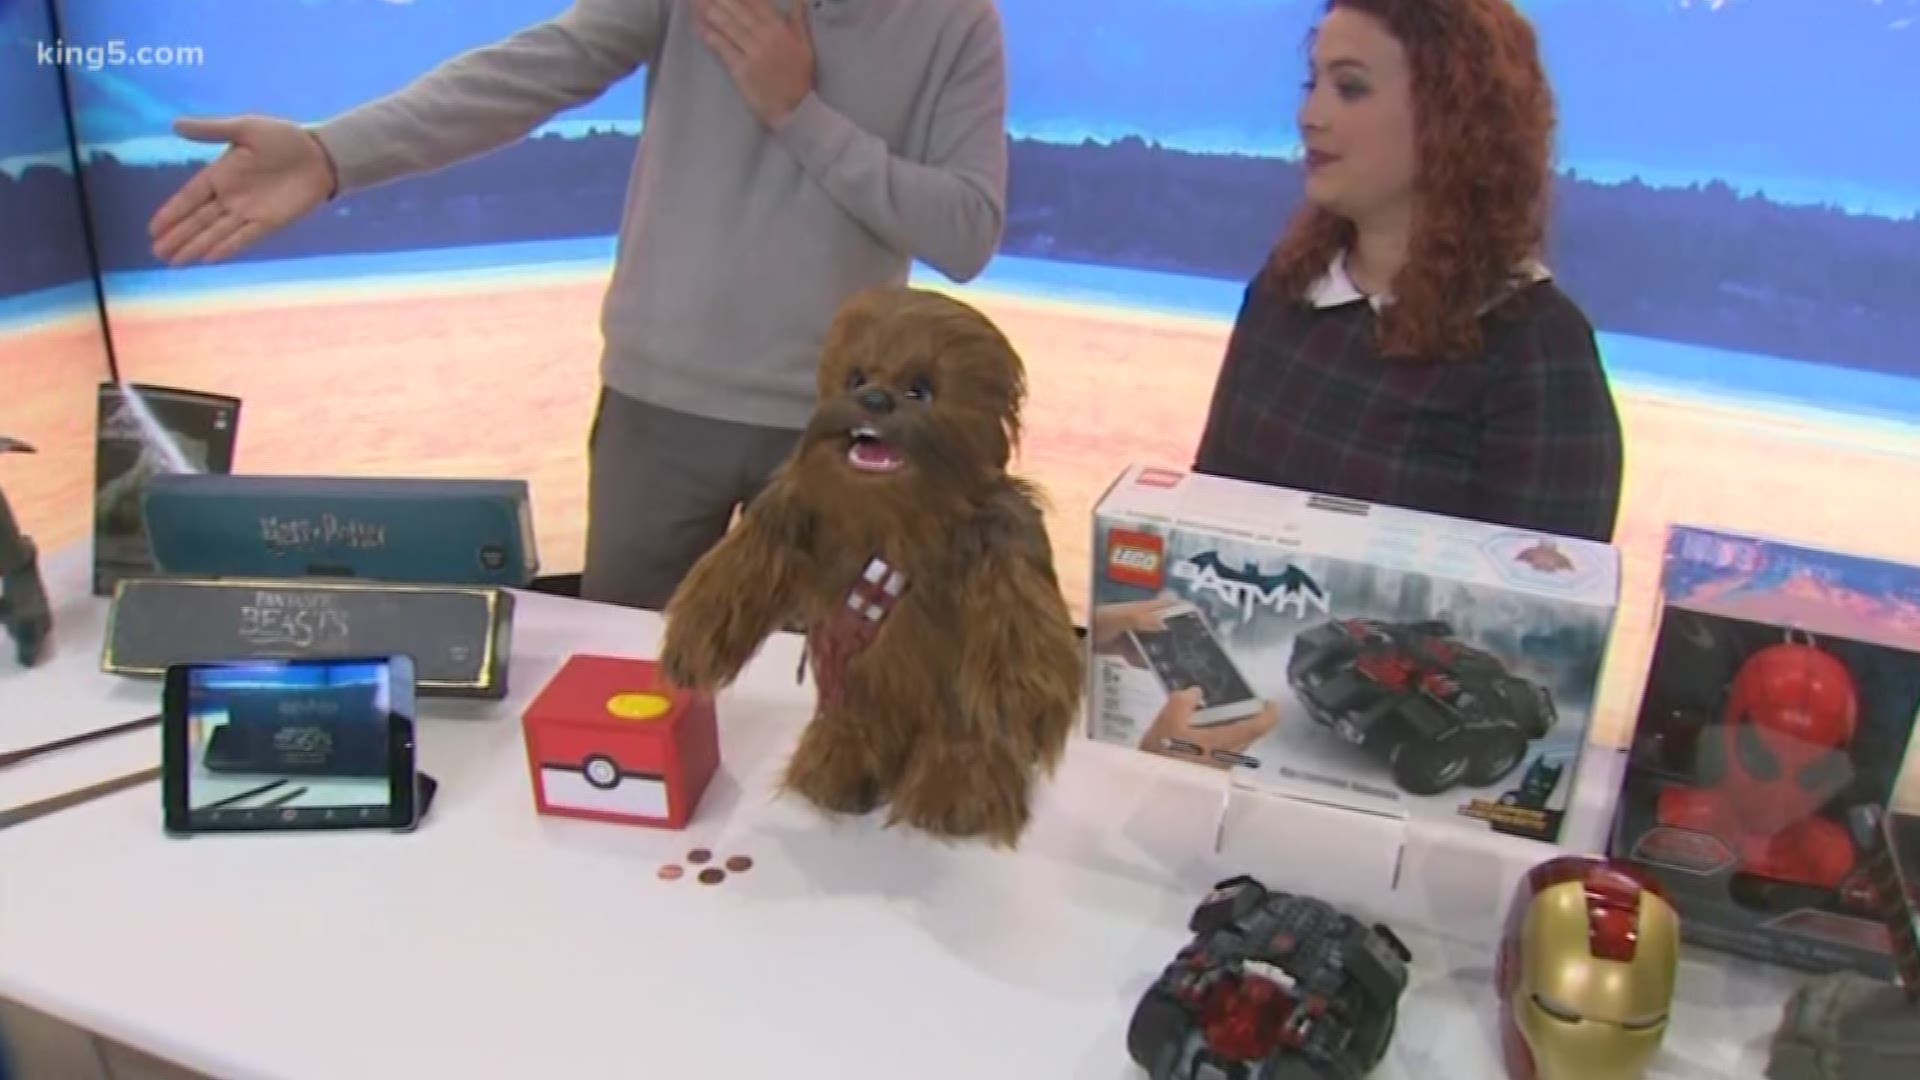 Chris Cashman checks out this holiday season's hottest tech toys inspired by pop culture.